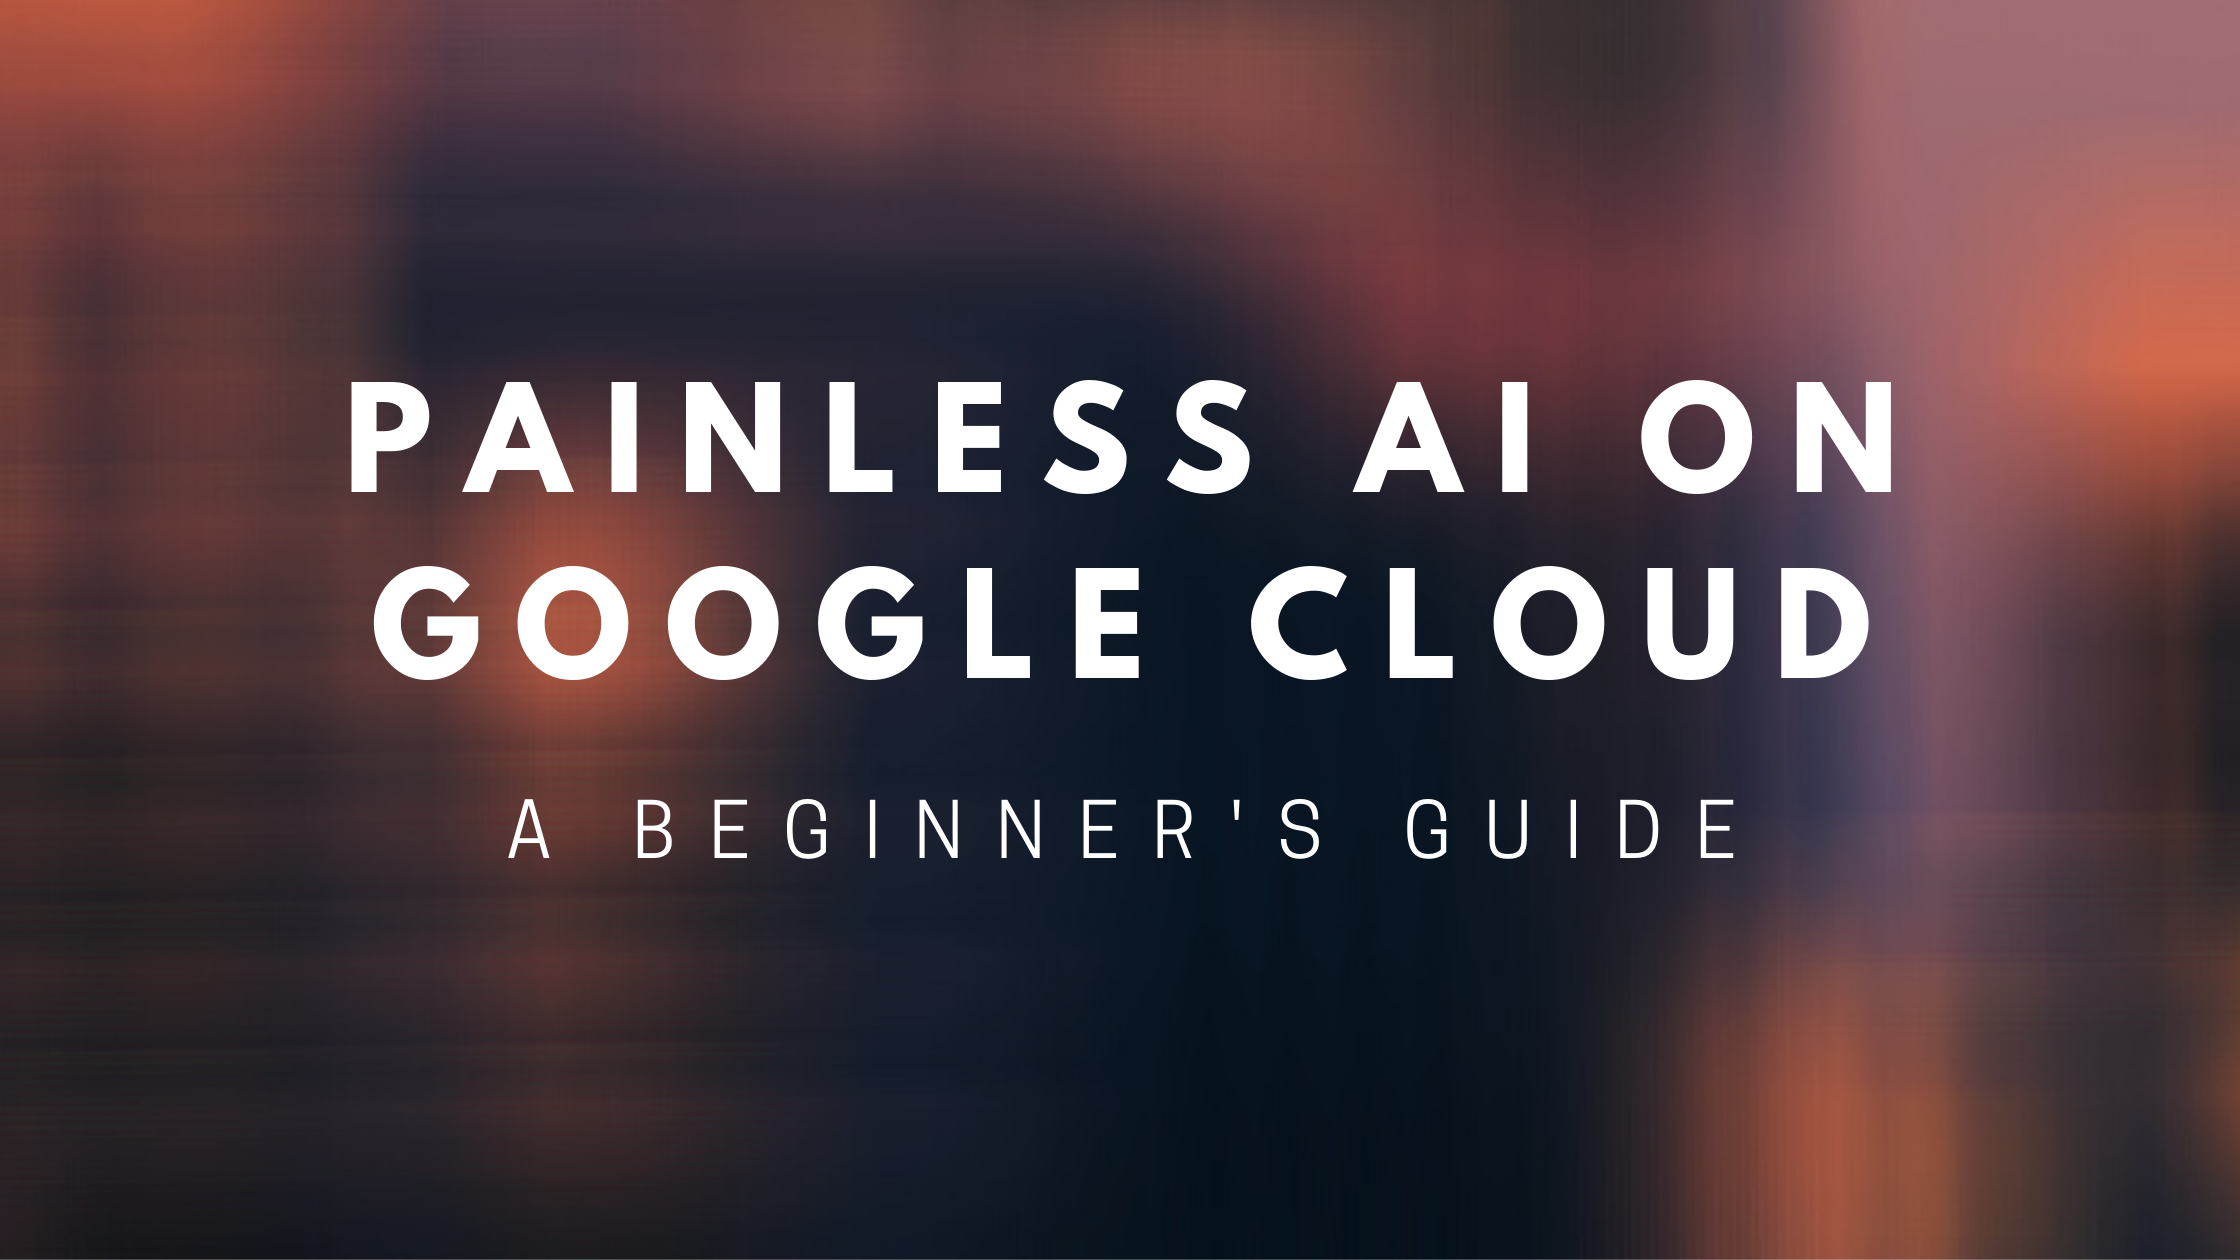 A Beginner's Guide to Painless ML on Google Cloud